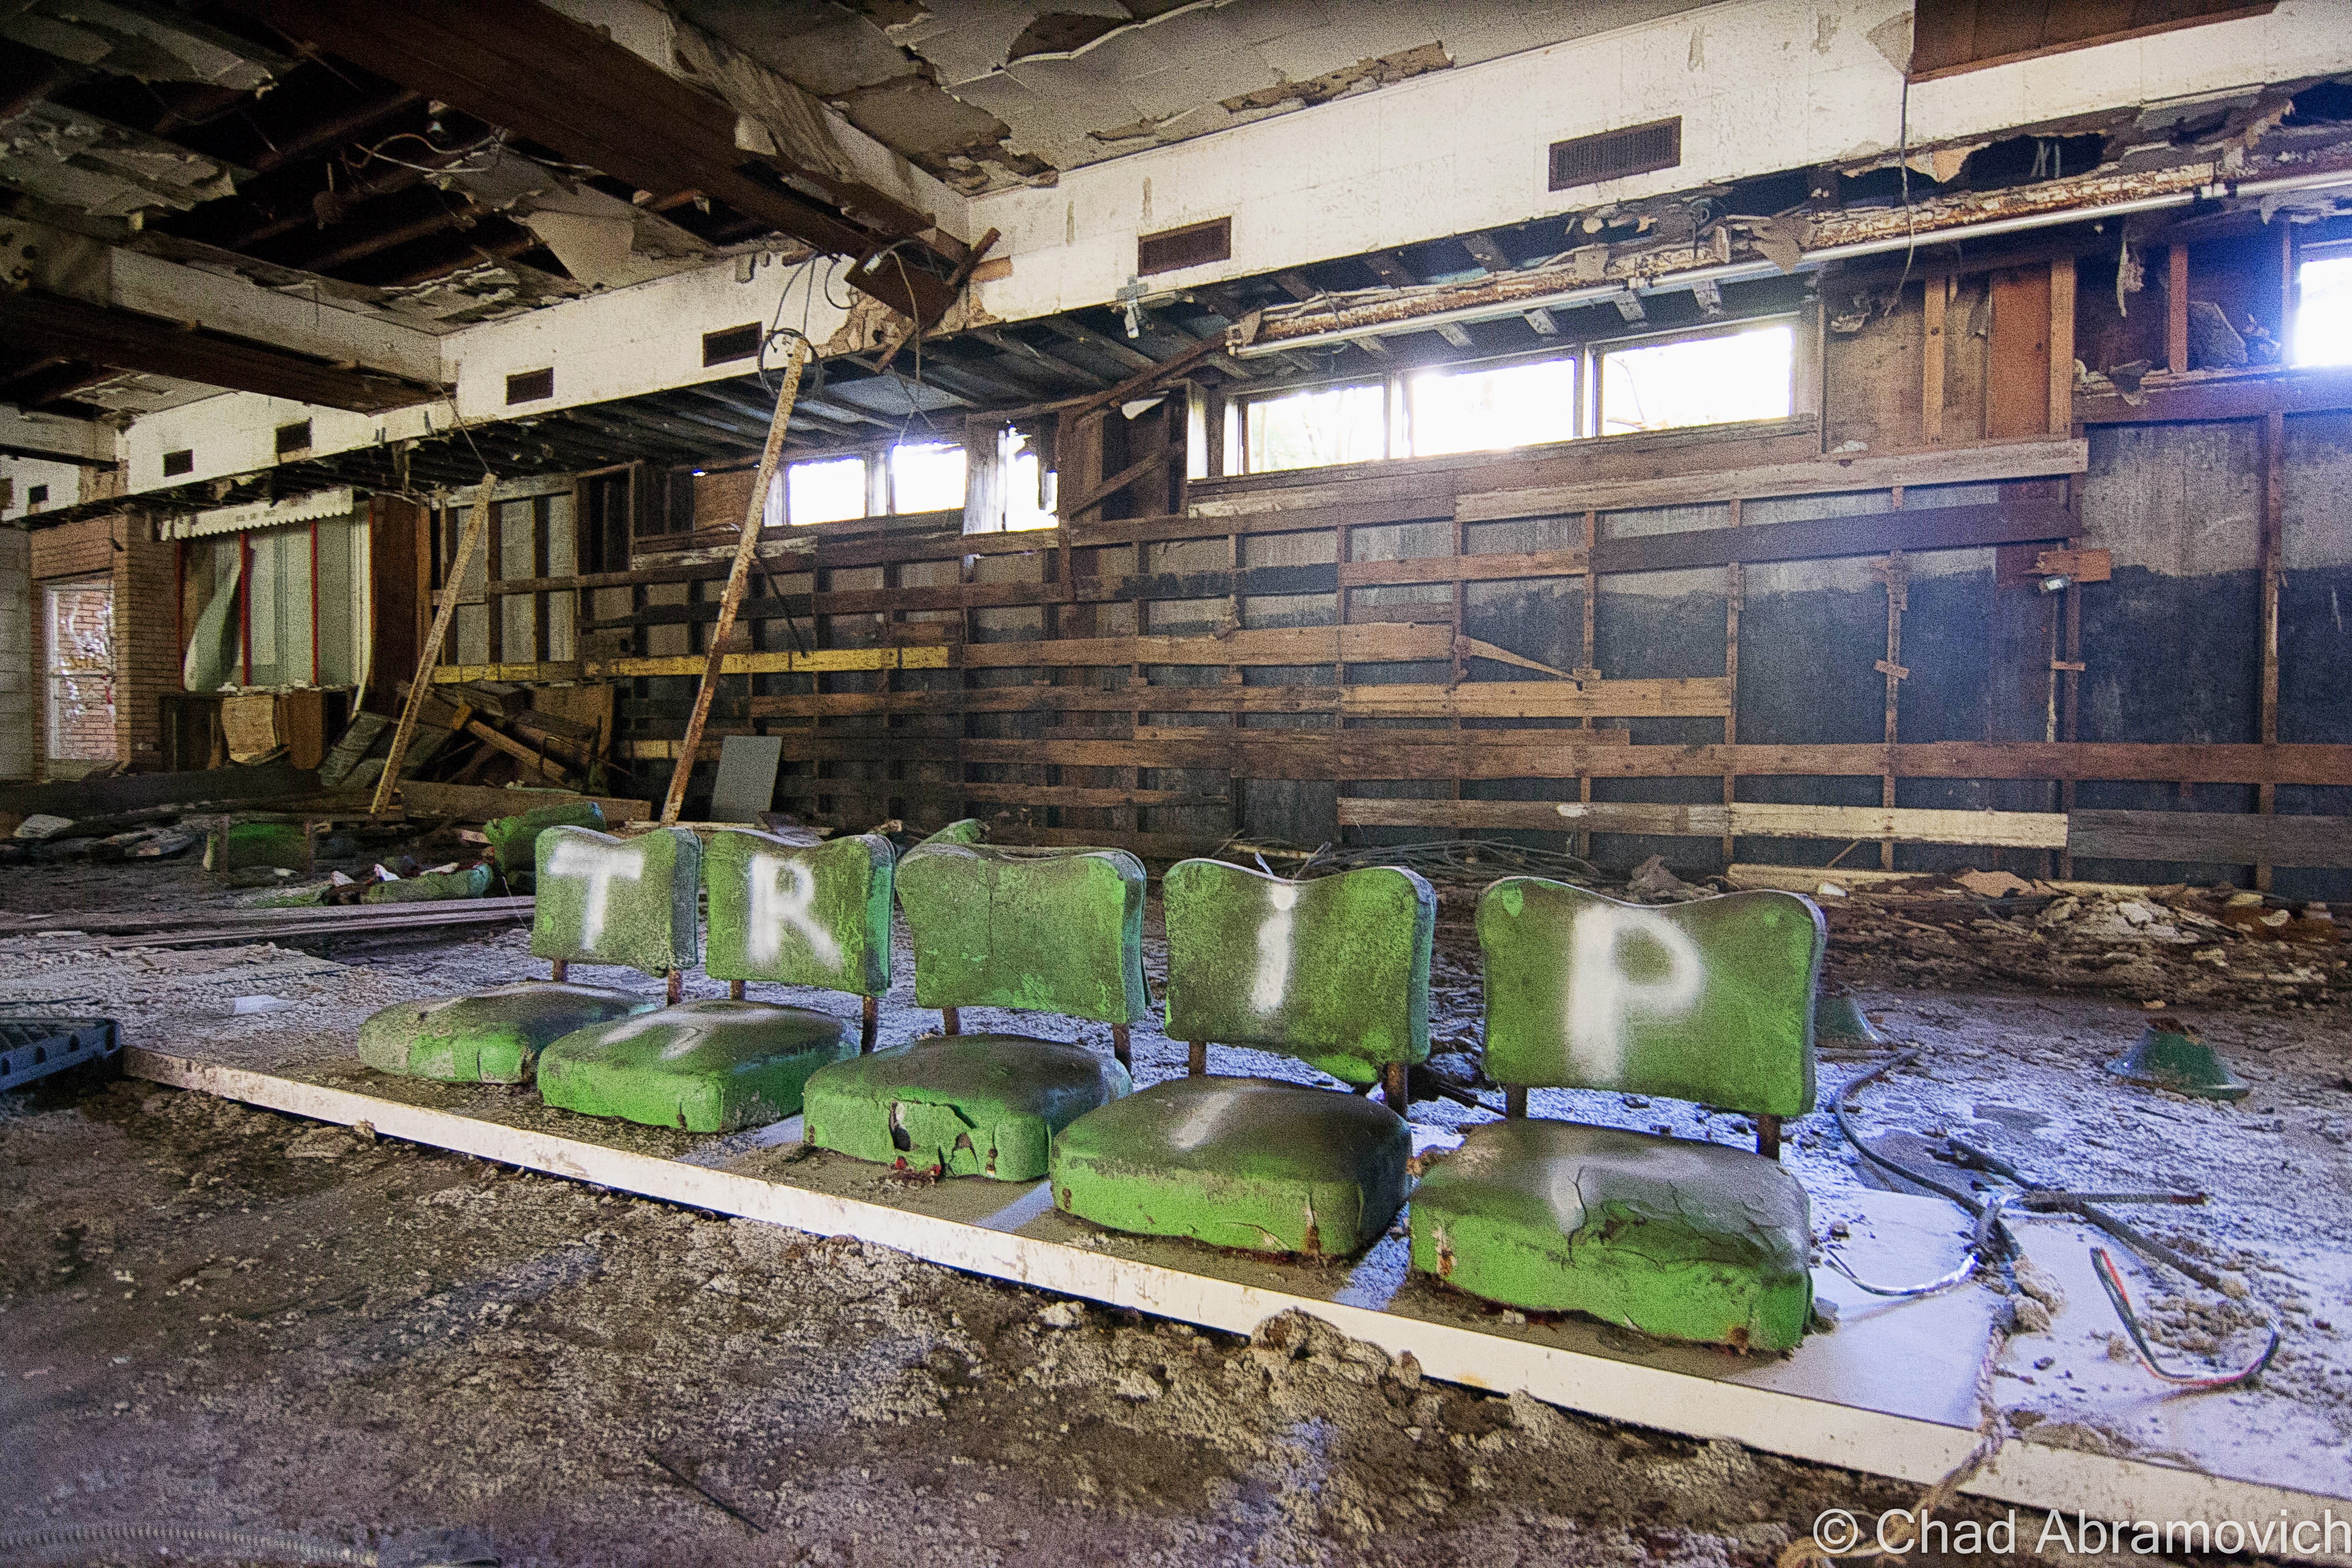 These 4 rotting bar stools are a photographic icon of this property. At one point, there were more of them, and they were all standing in a row lining the bar that they once accompanied. Today, only these 4 remain, barely.